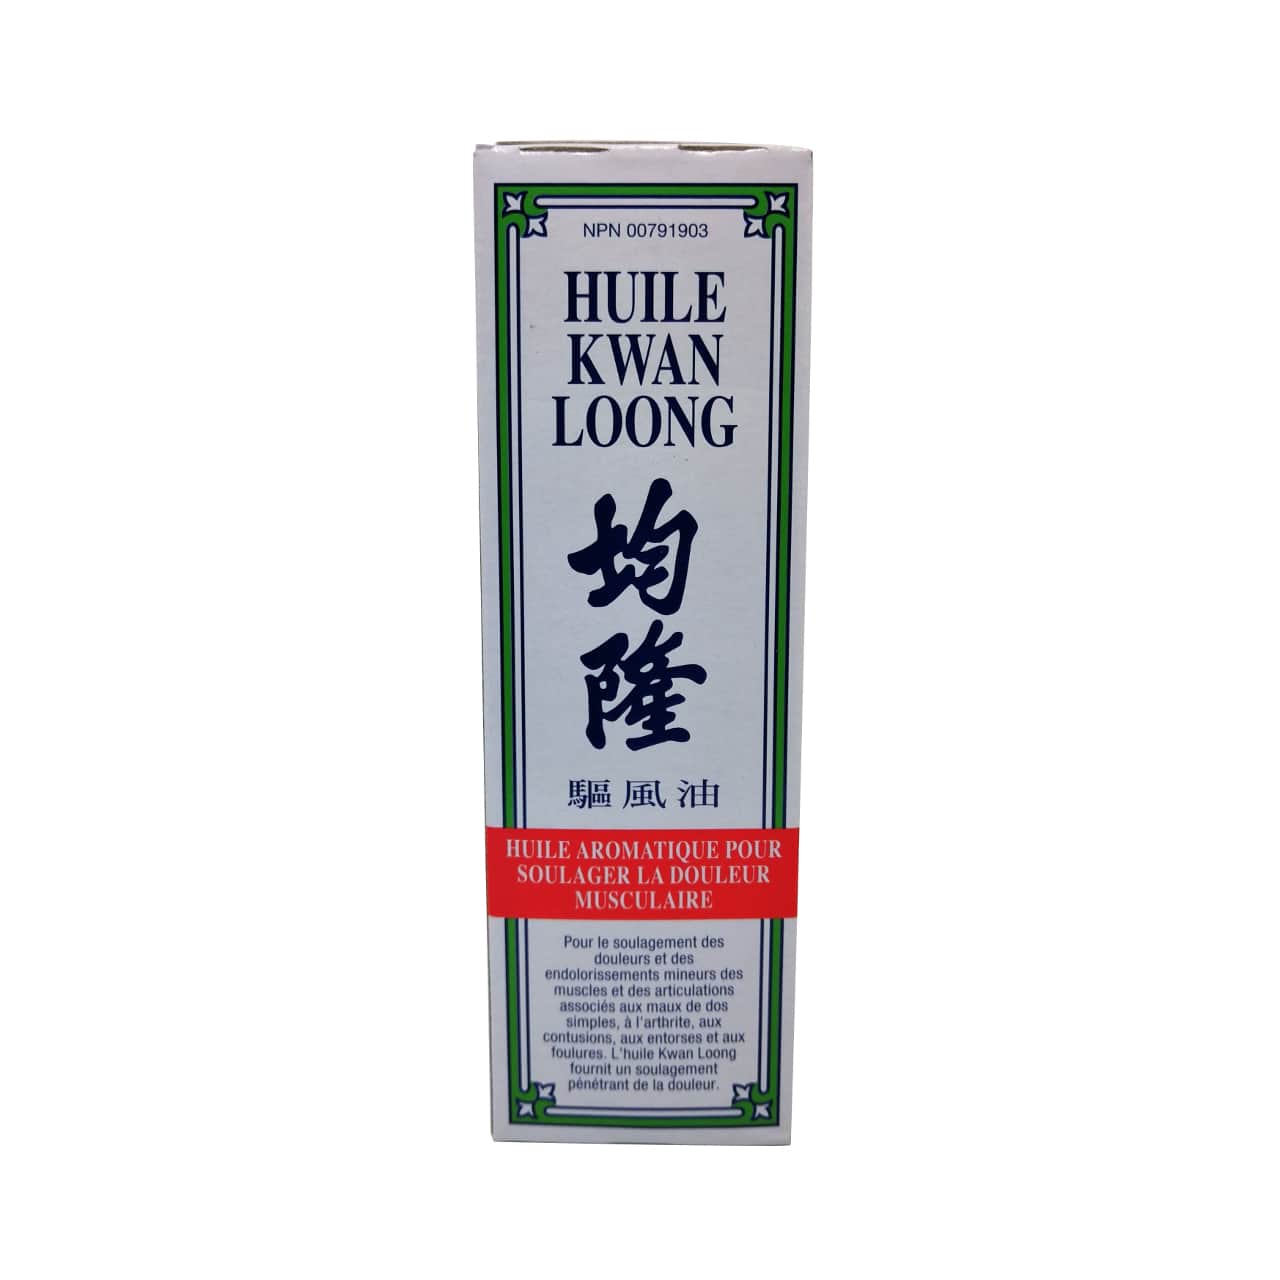 Product label for Kwan Loong Pain Relieving Aromatic Oil in French